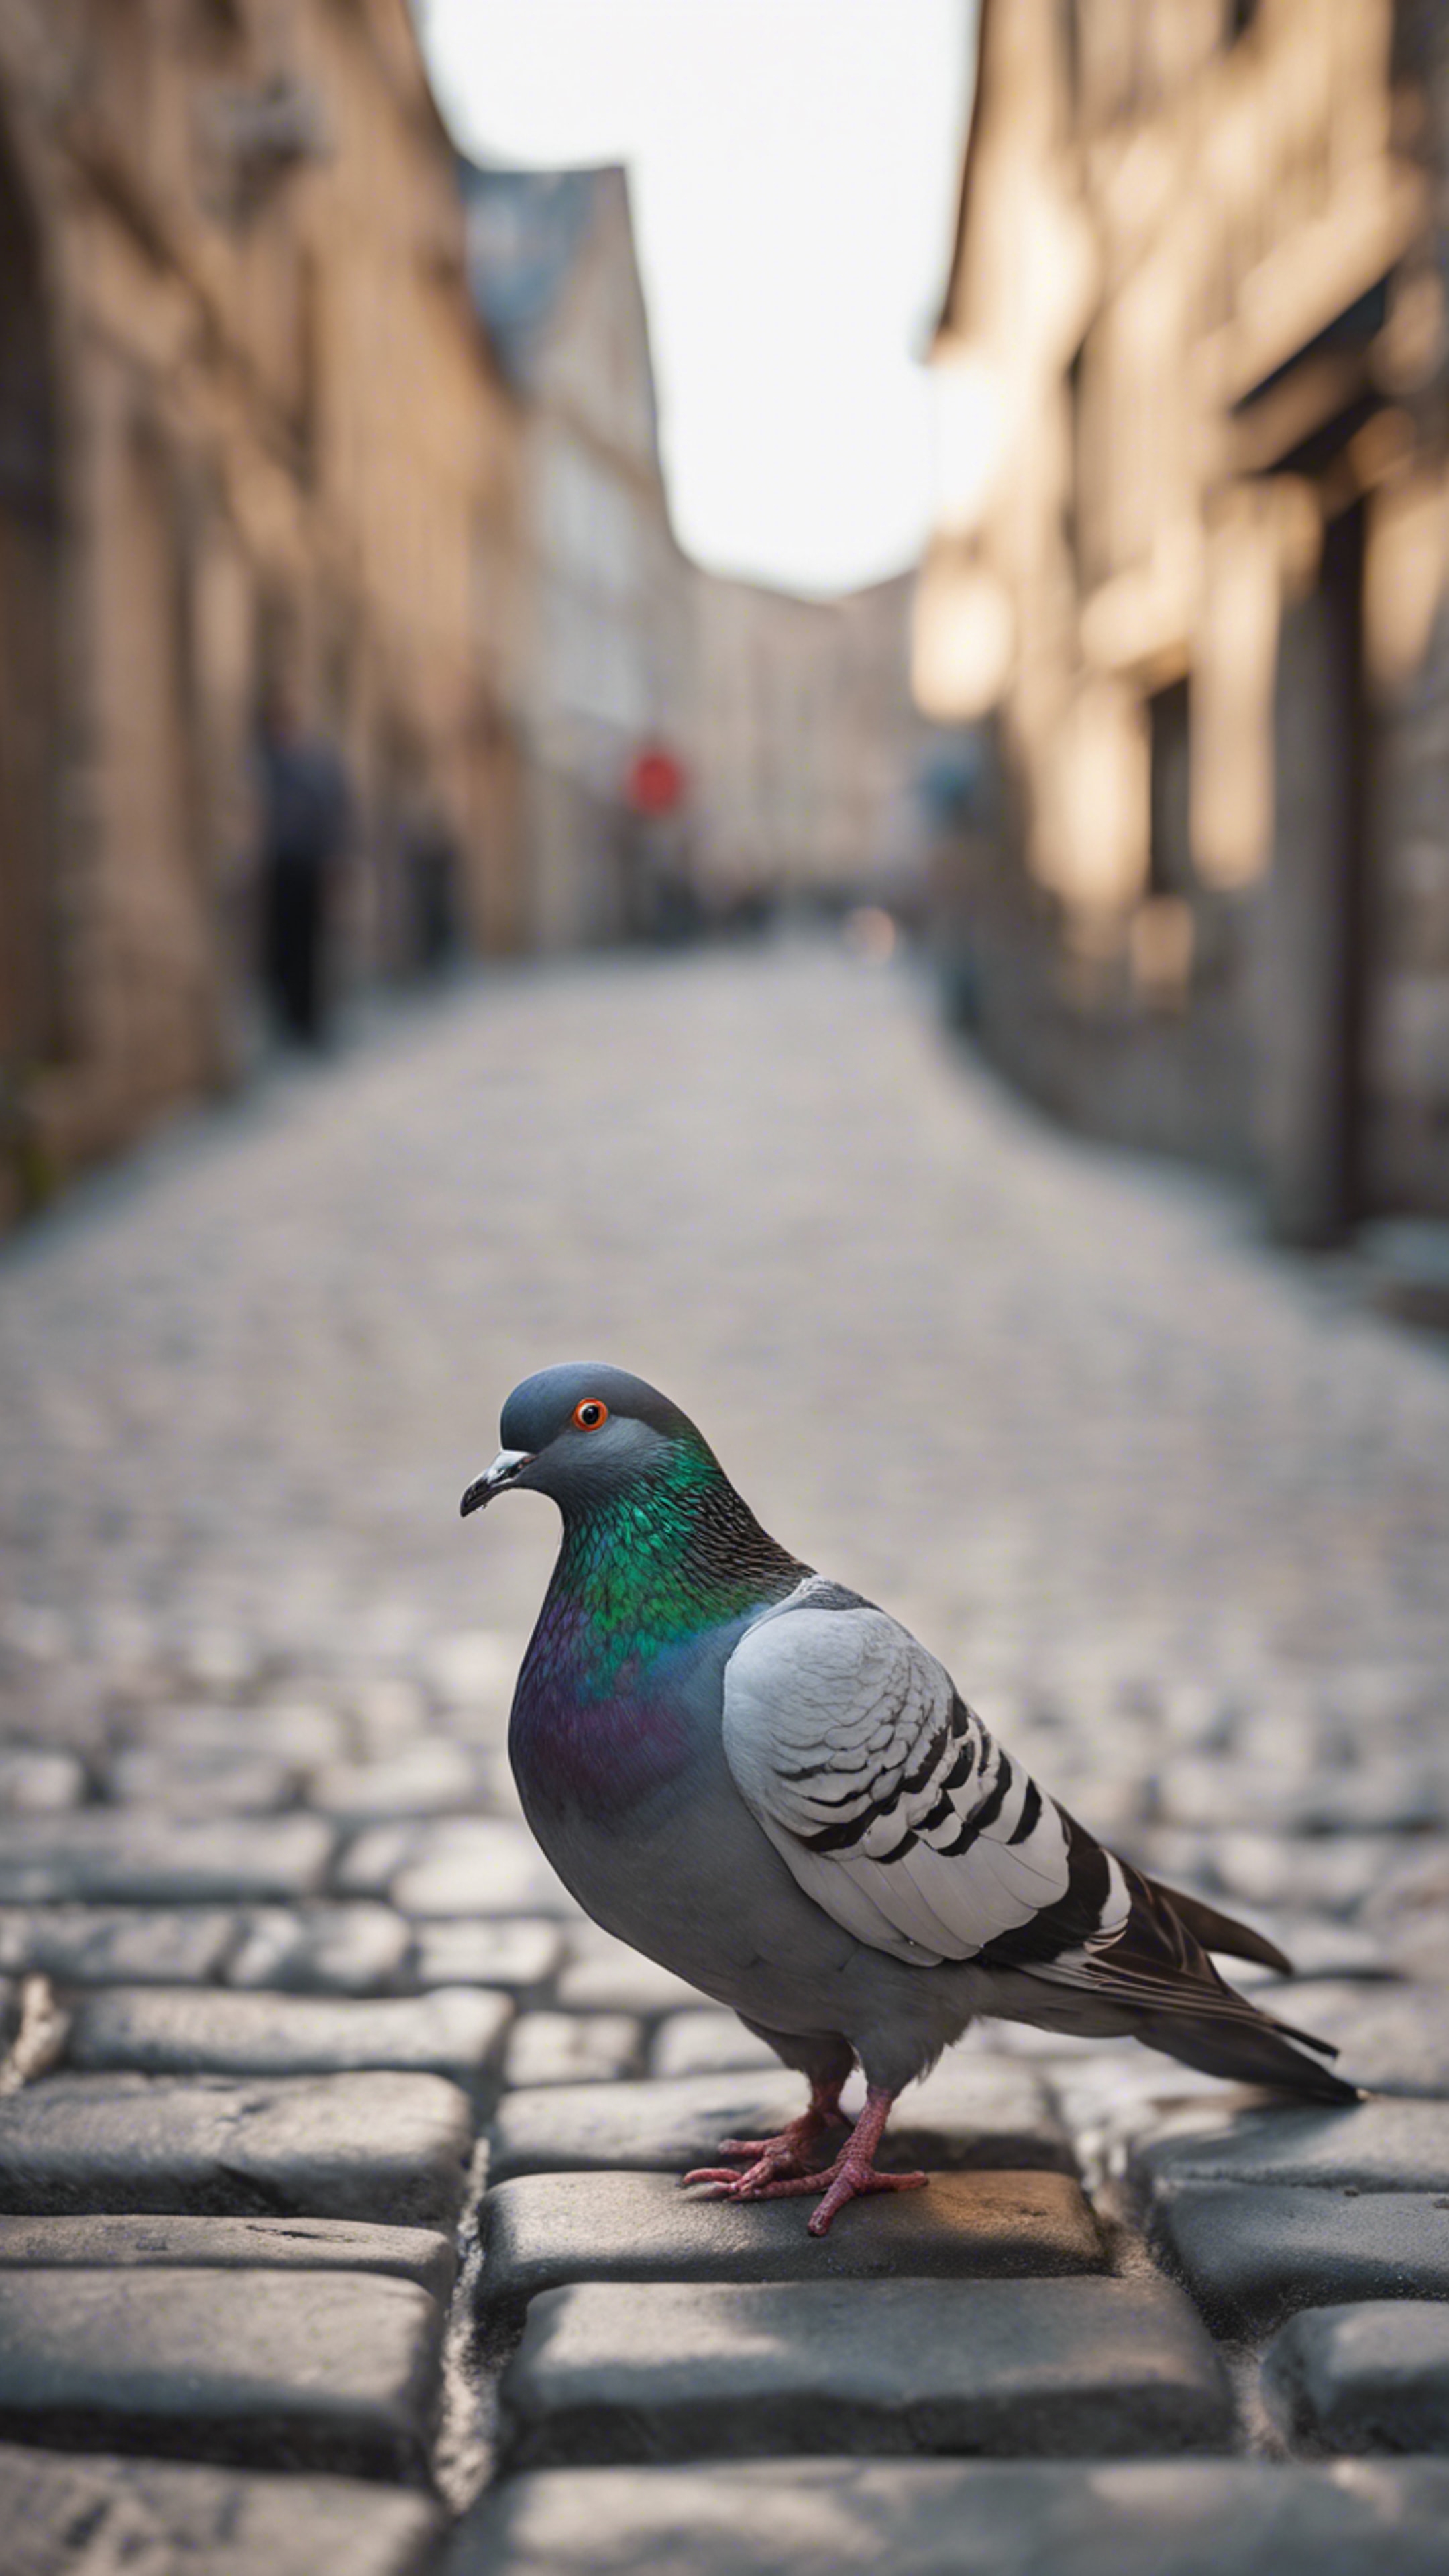 A pigeon standing on cobblestone street in the middle of an old city, its beautiful light gray plumage glistening. Tapeta[03a93bb4226c4140ad33]